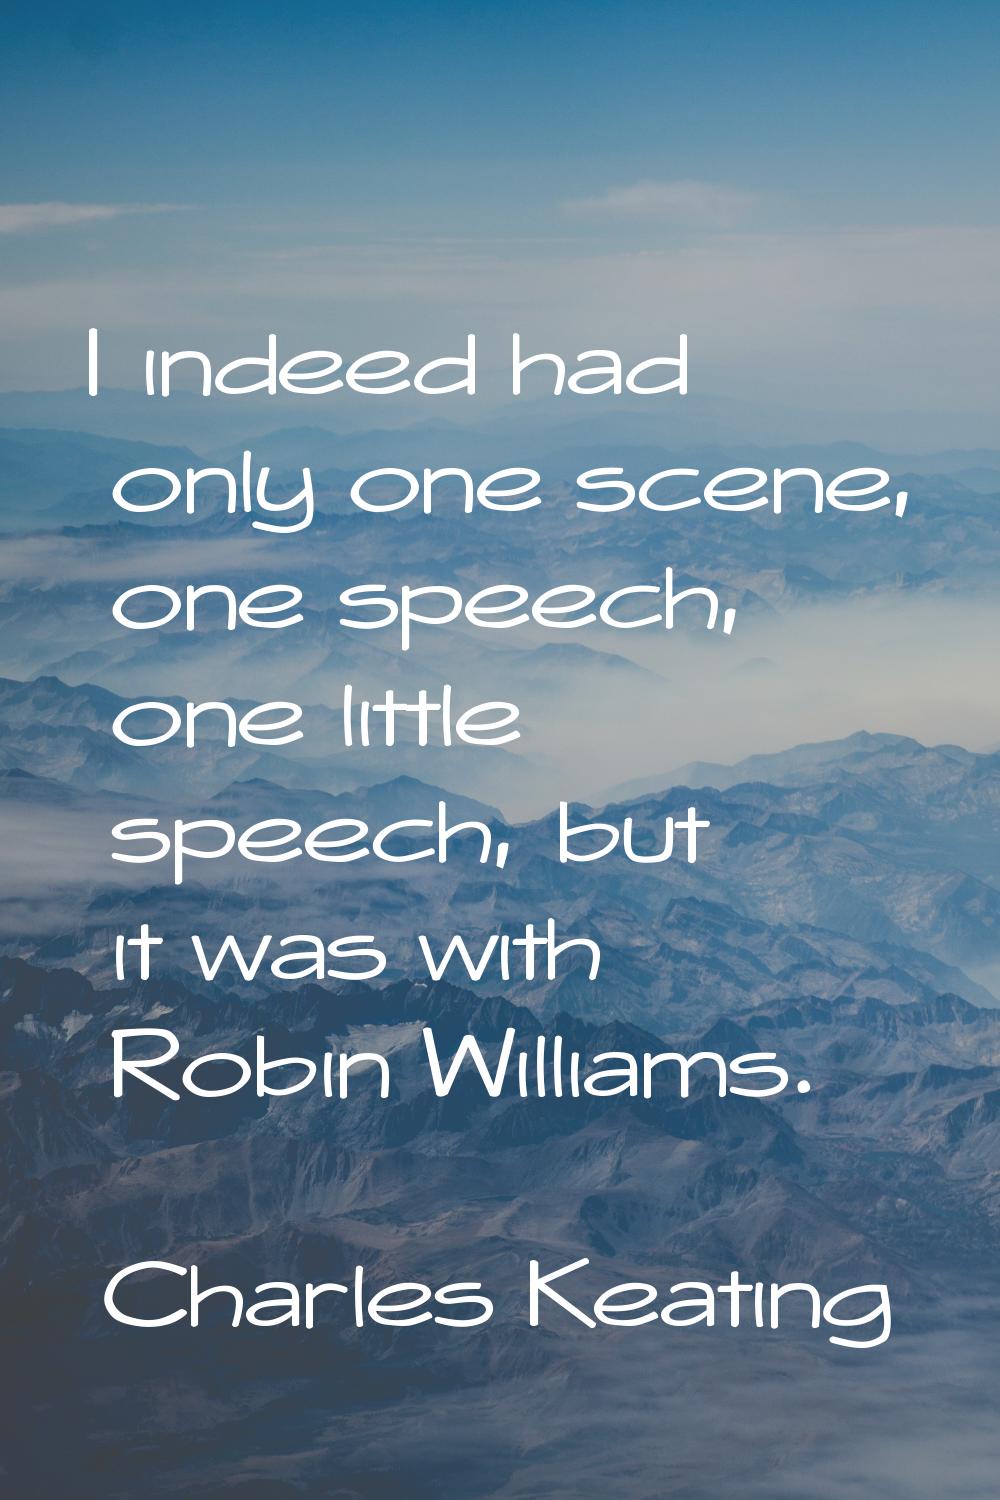 I indeed had only one scene, one speech, one little speech, but it was with Robin Williams.